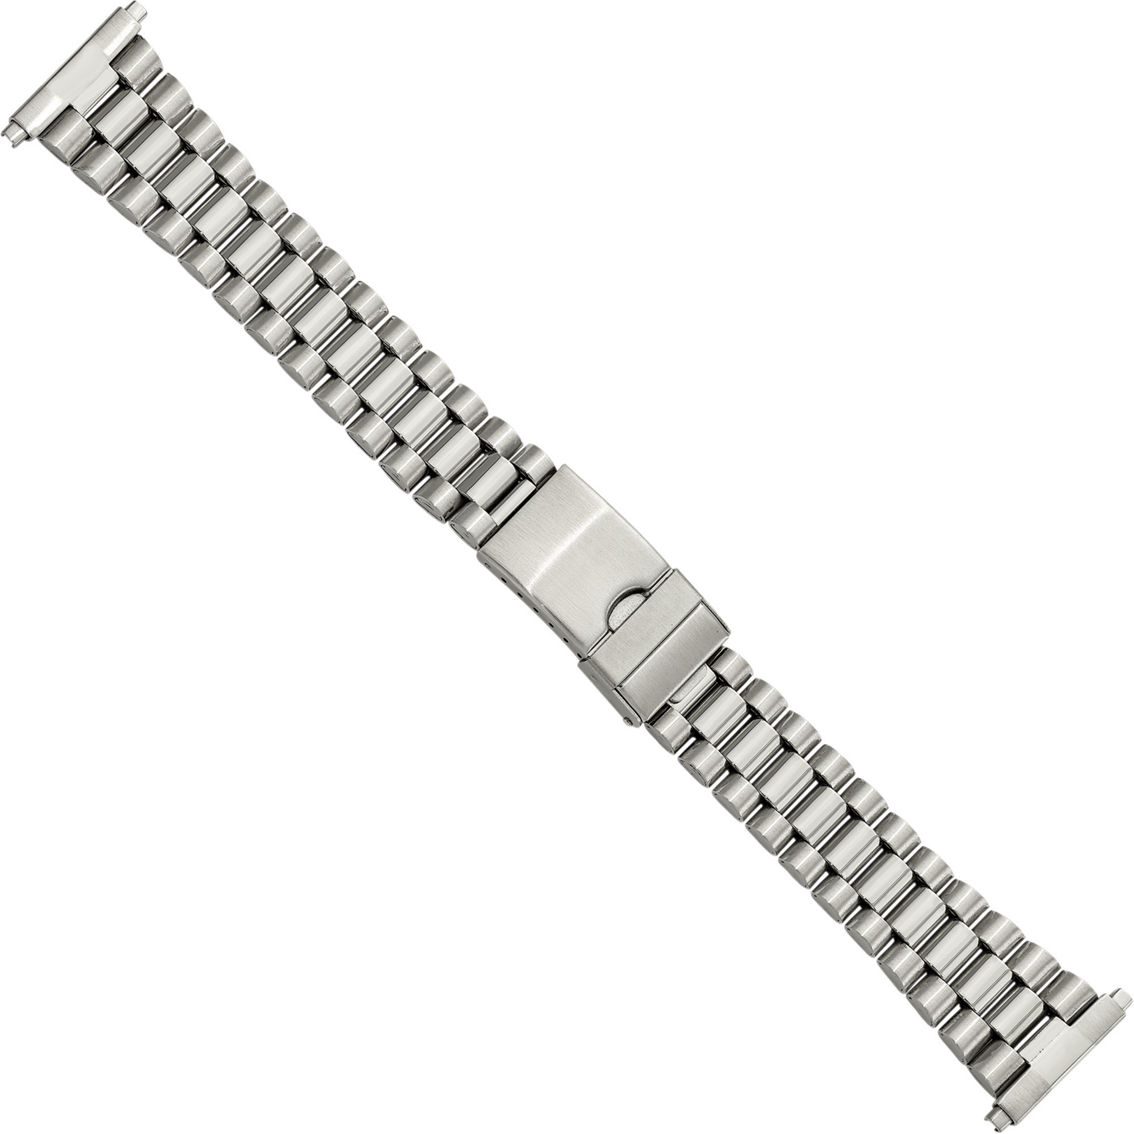 Gilden Men’s Long 18-22mm Stainless Steel Watch Band 7.5 in. - Image 2 of 4